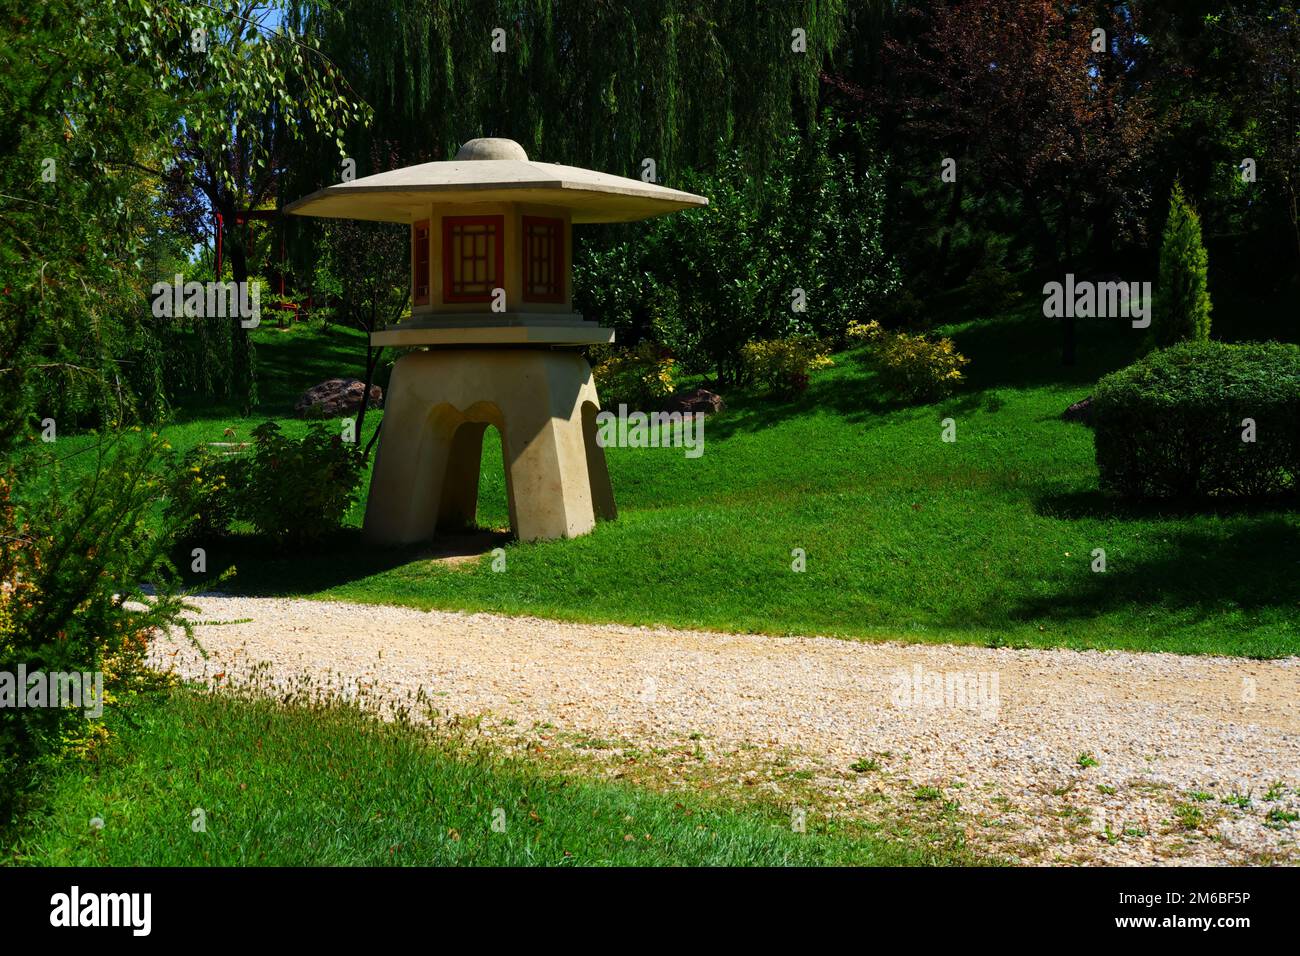 Miniature concrete watch tower at park near footpath within trees and grass in a sunny summer day Stock Photo